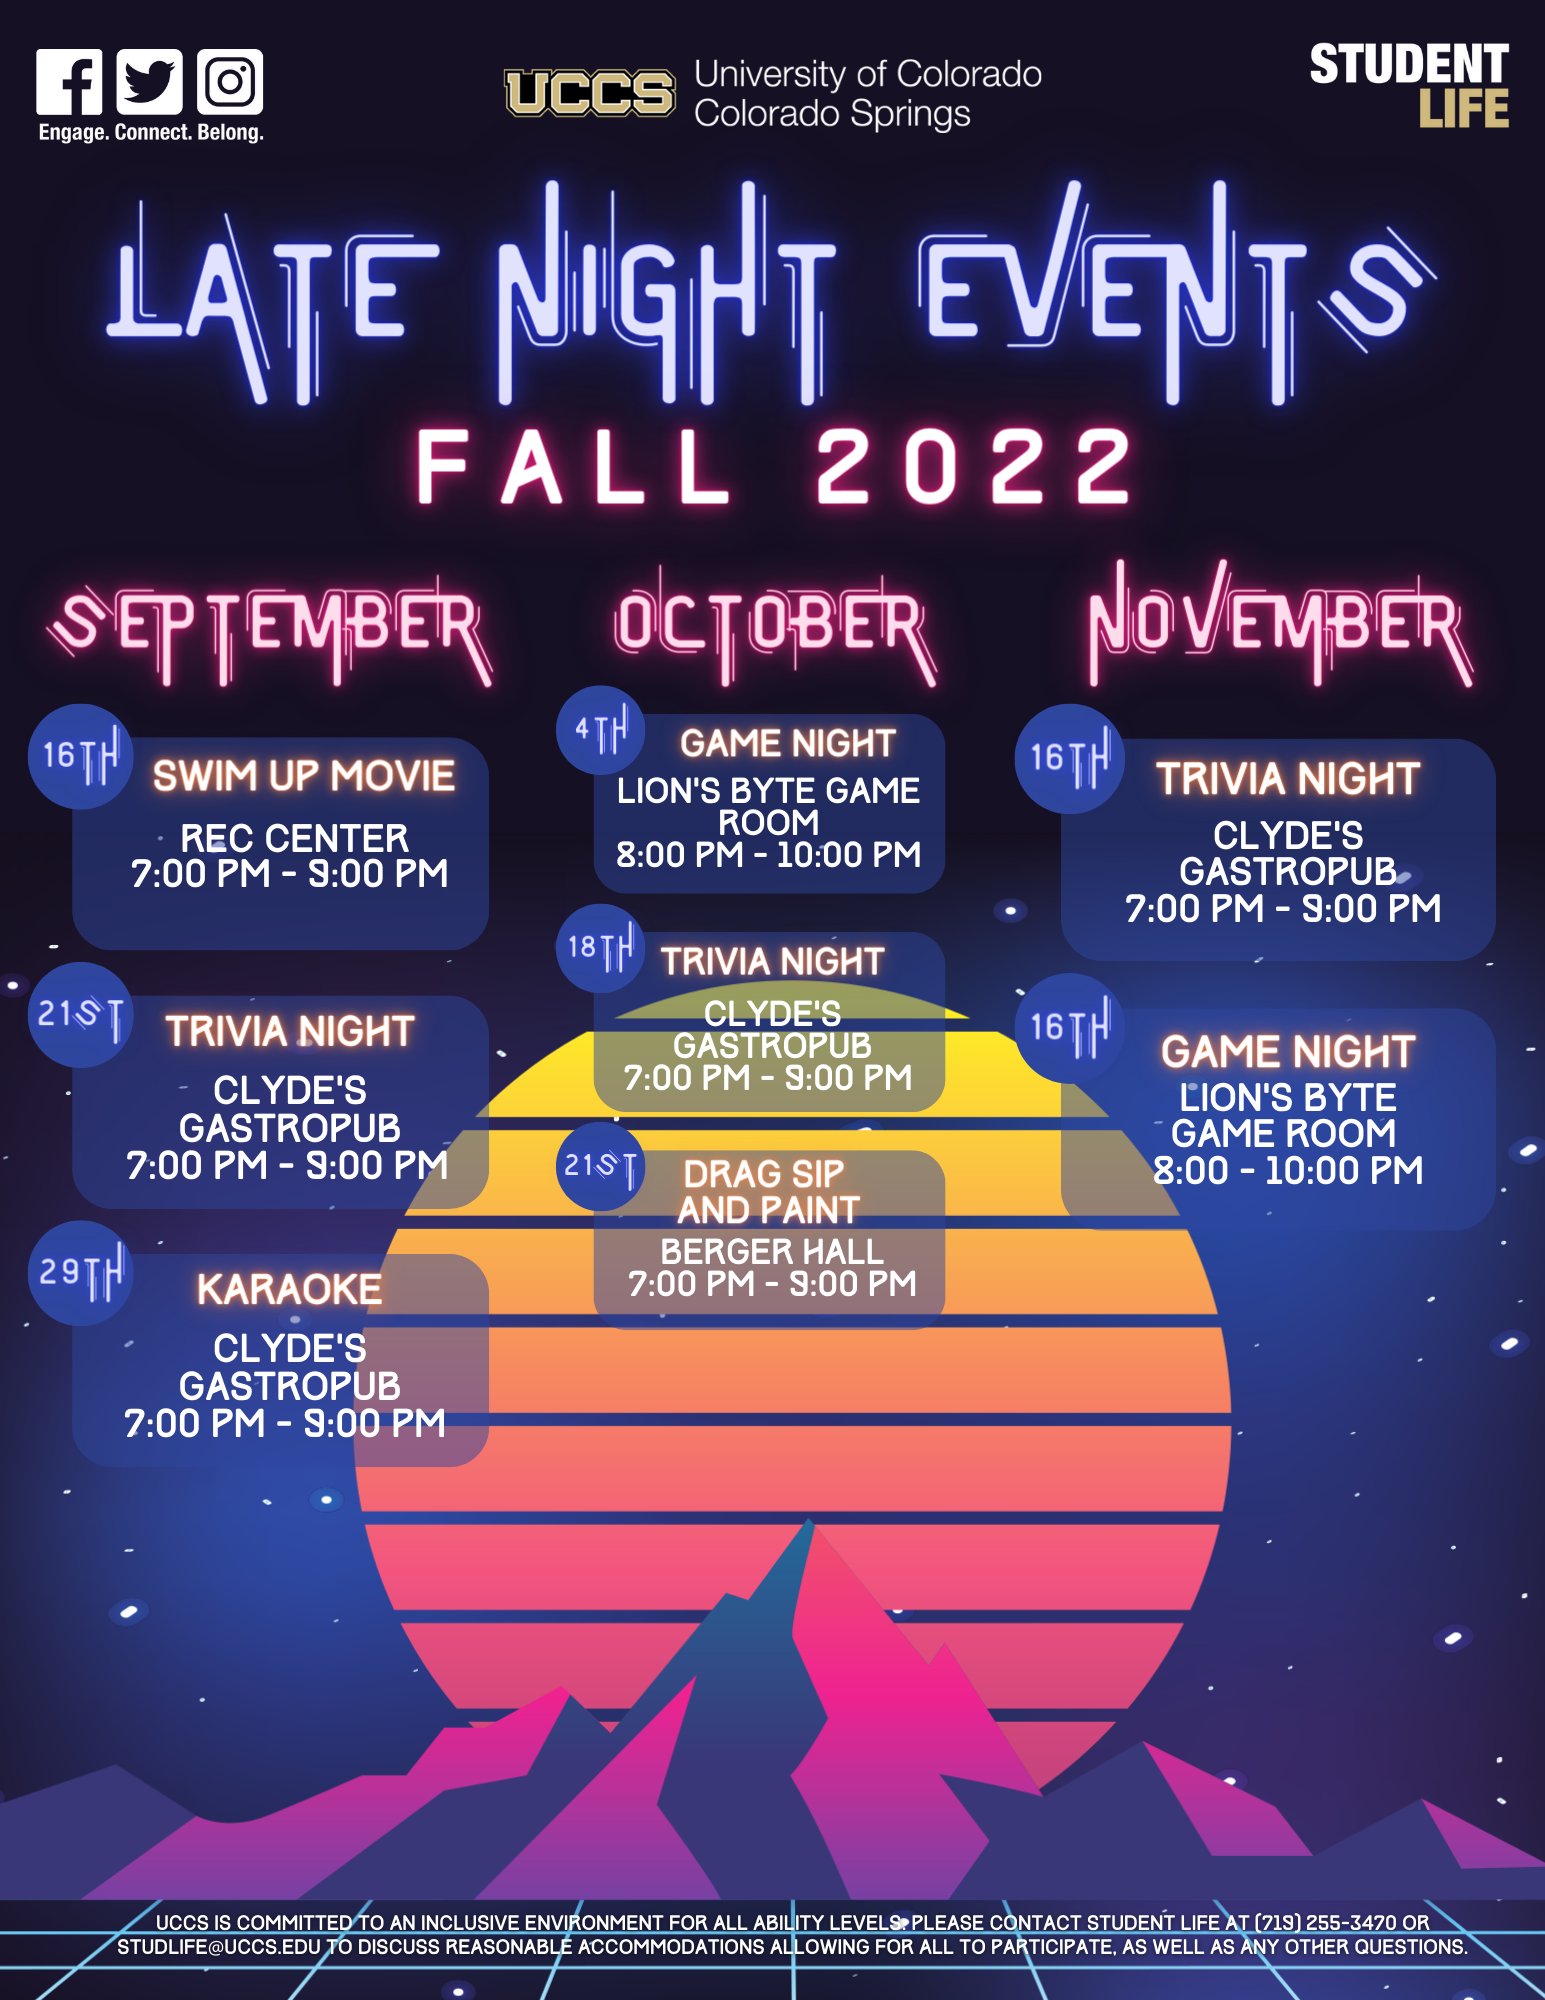 Late Night Events Fall 2022